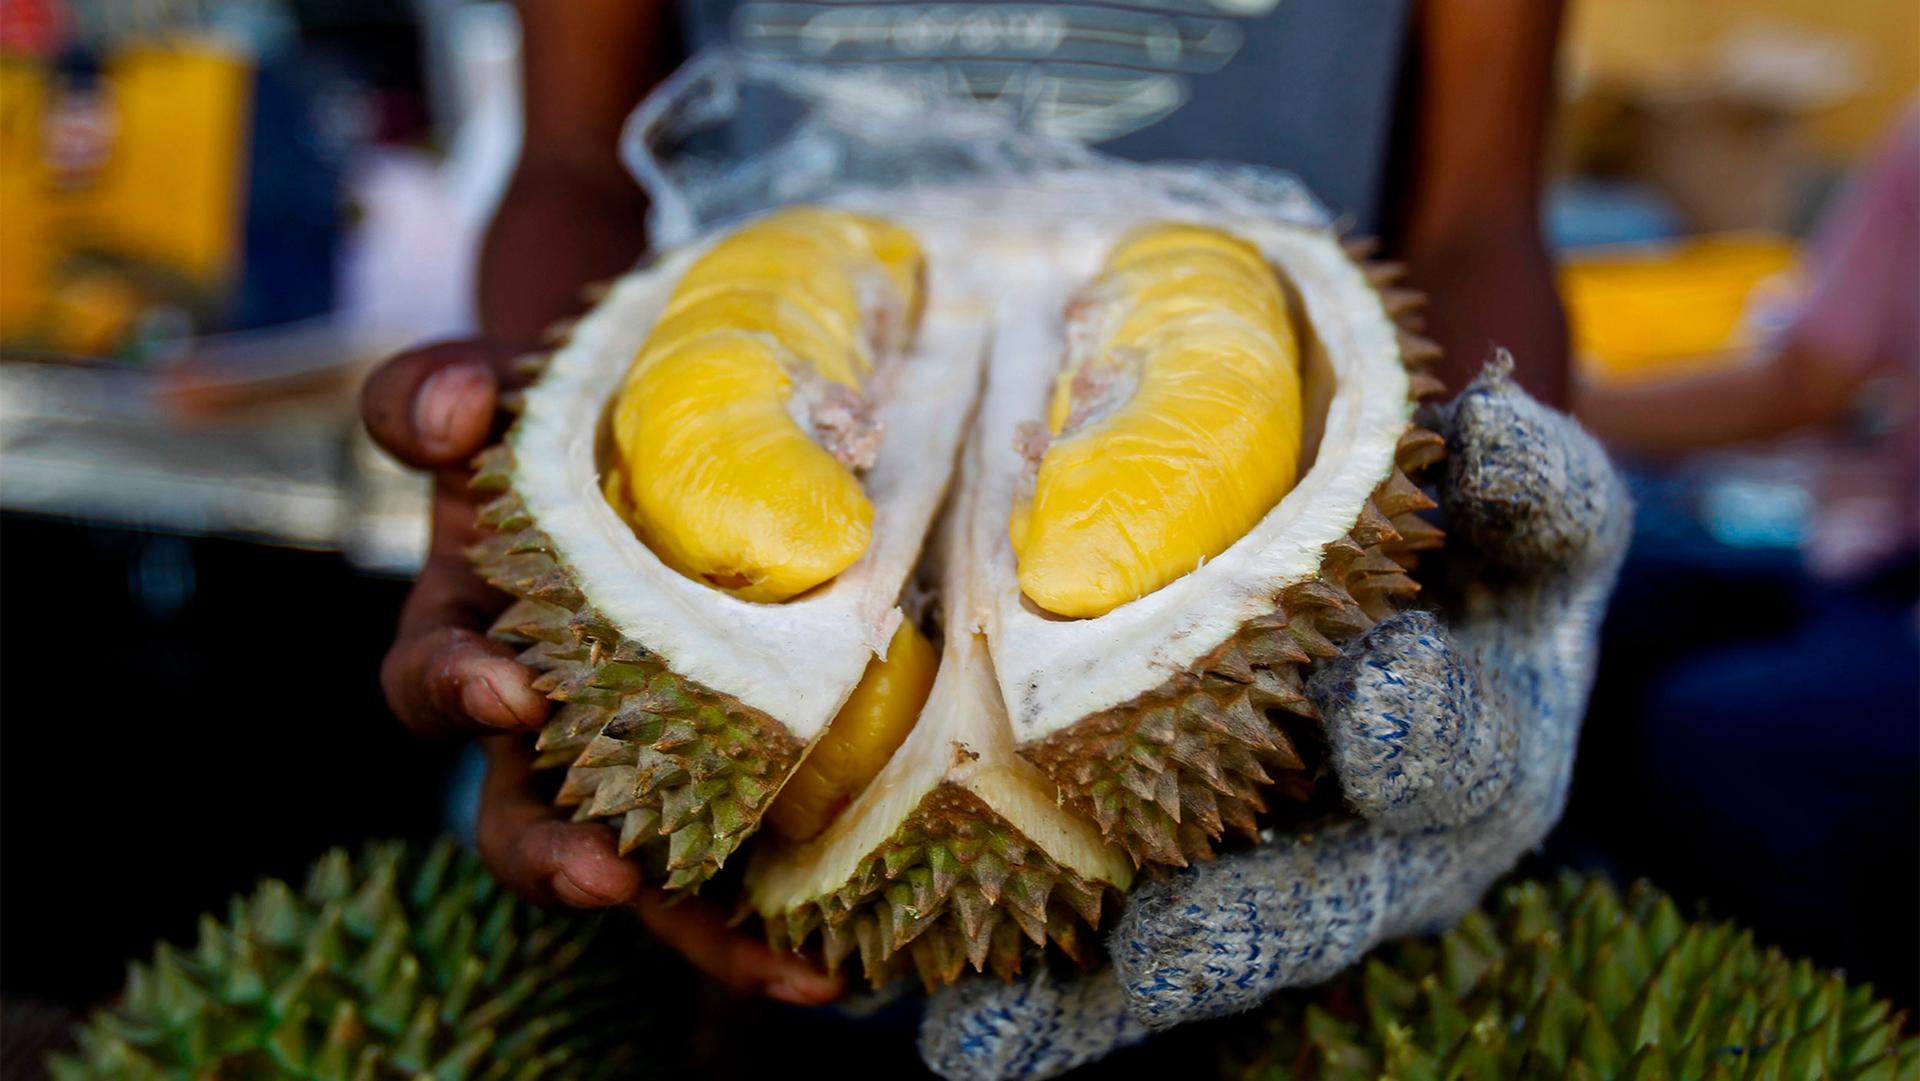 Woman wearing gloves holds out a durian fruit